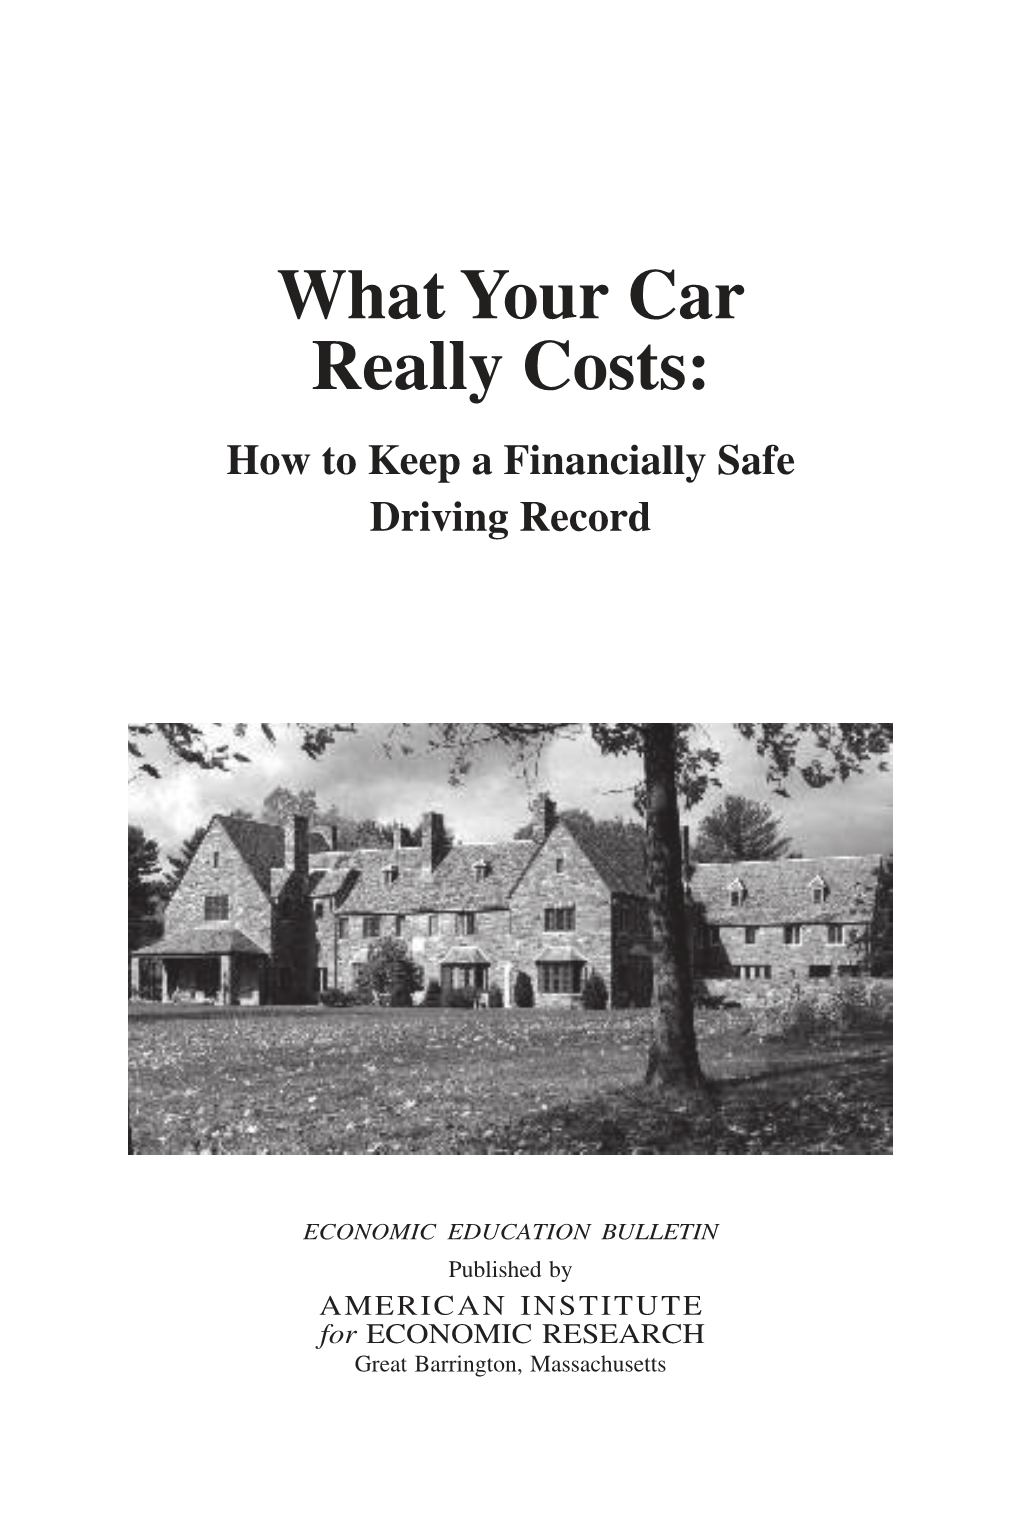 What Your Car Really Costs: How to Keep a Financially Safe Driving Record